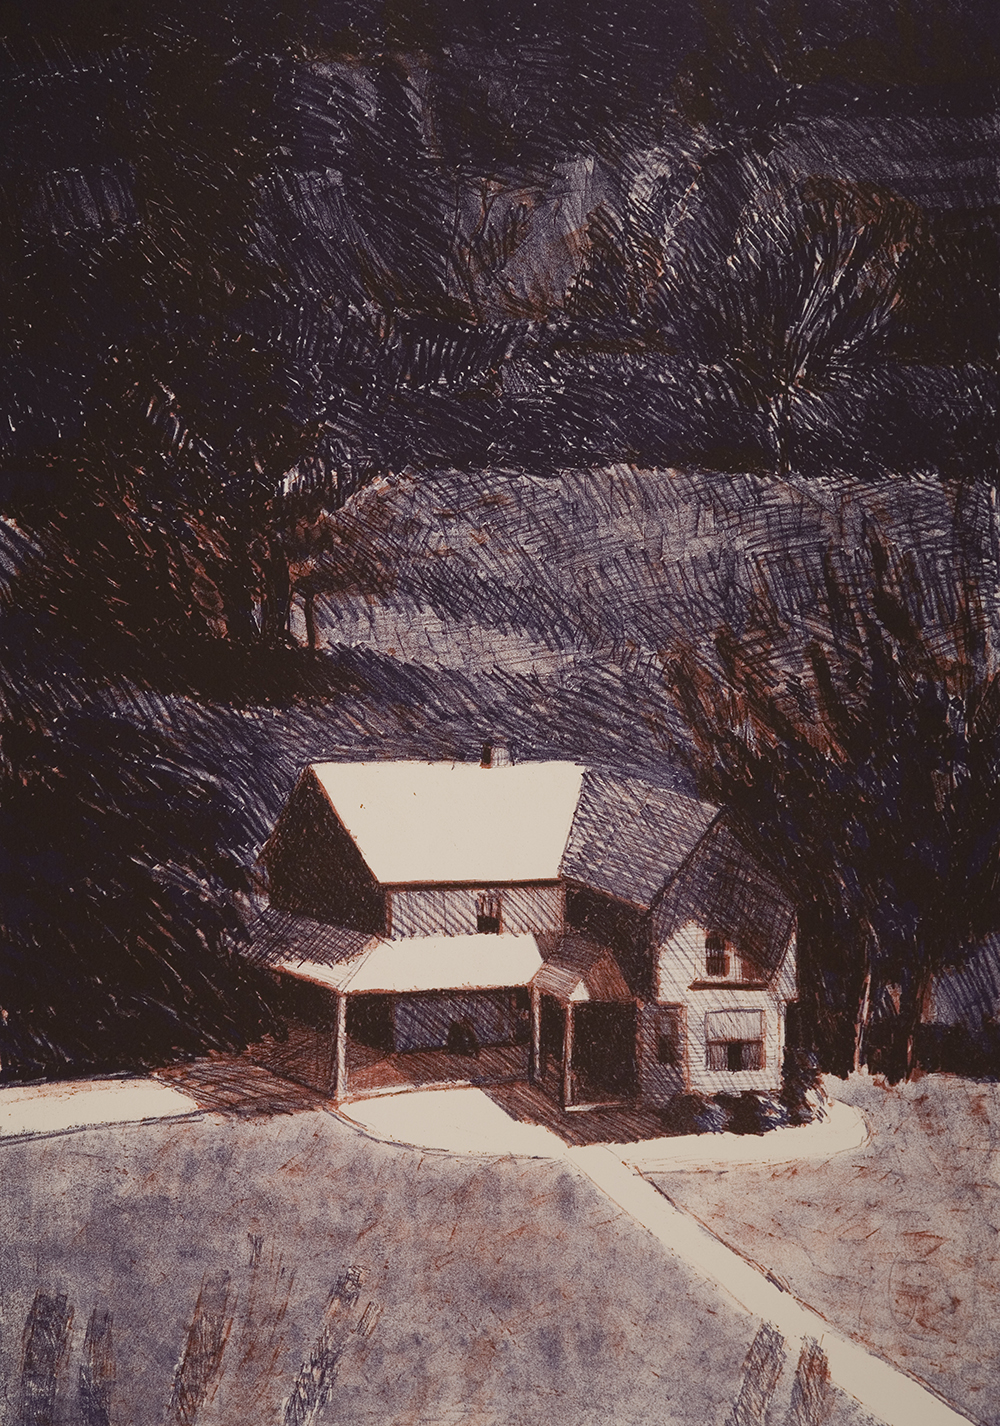 A print of a house at night. The house is lighter in the foreground with the background taking up two-thirds of the print. The background is a dark landscape of hills and trees rendered in cross-hatching. The house is an L-shape with a pitched roof and wrap-around porch. 